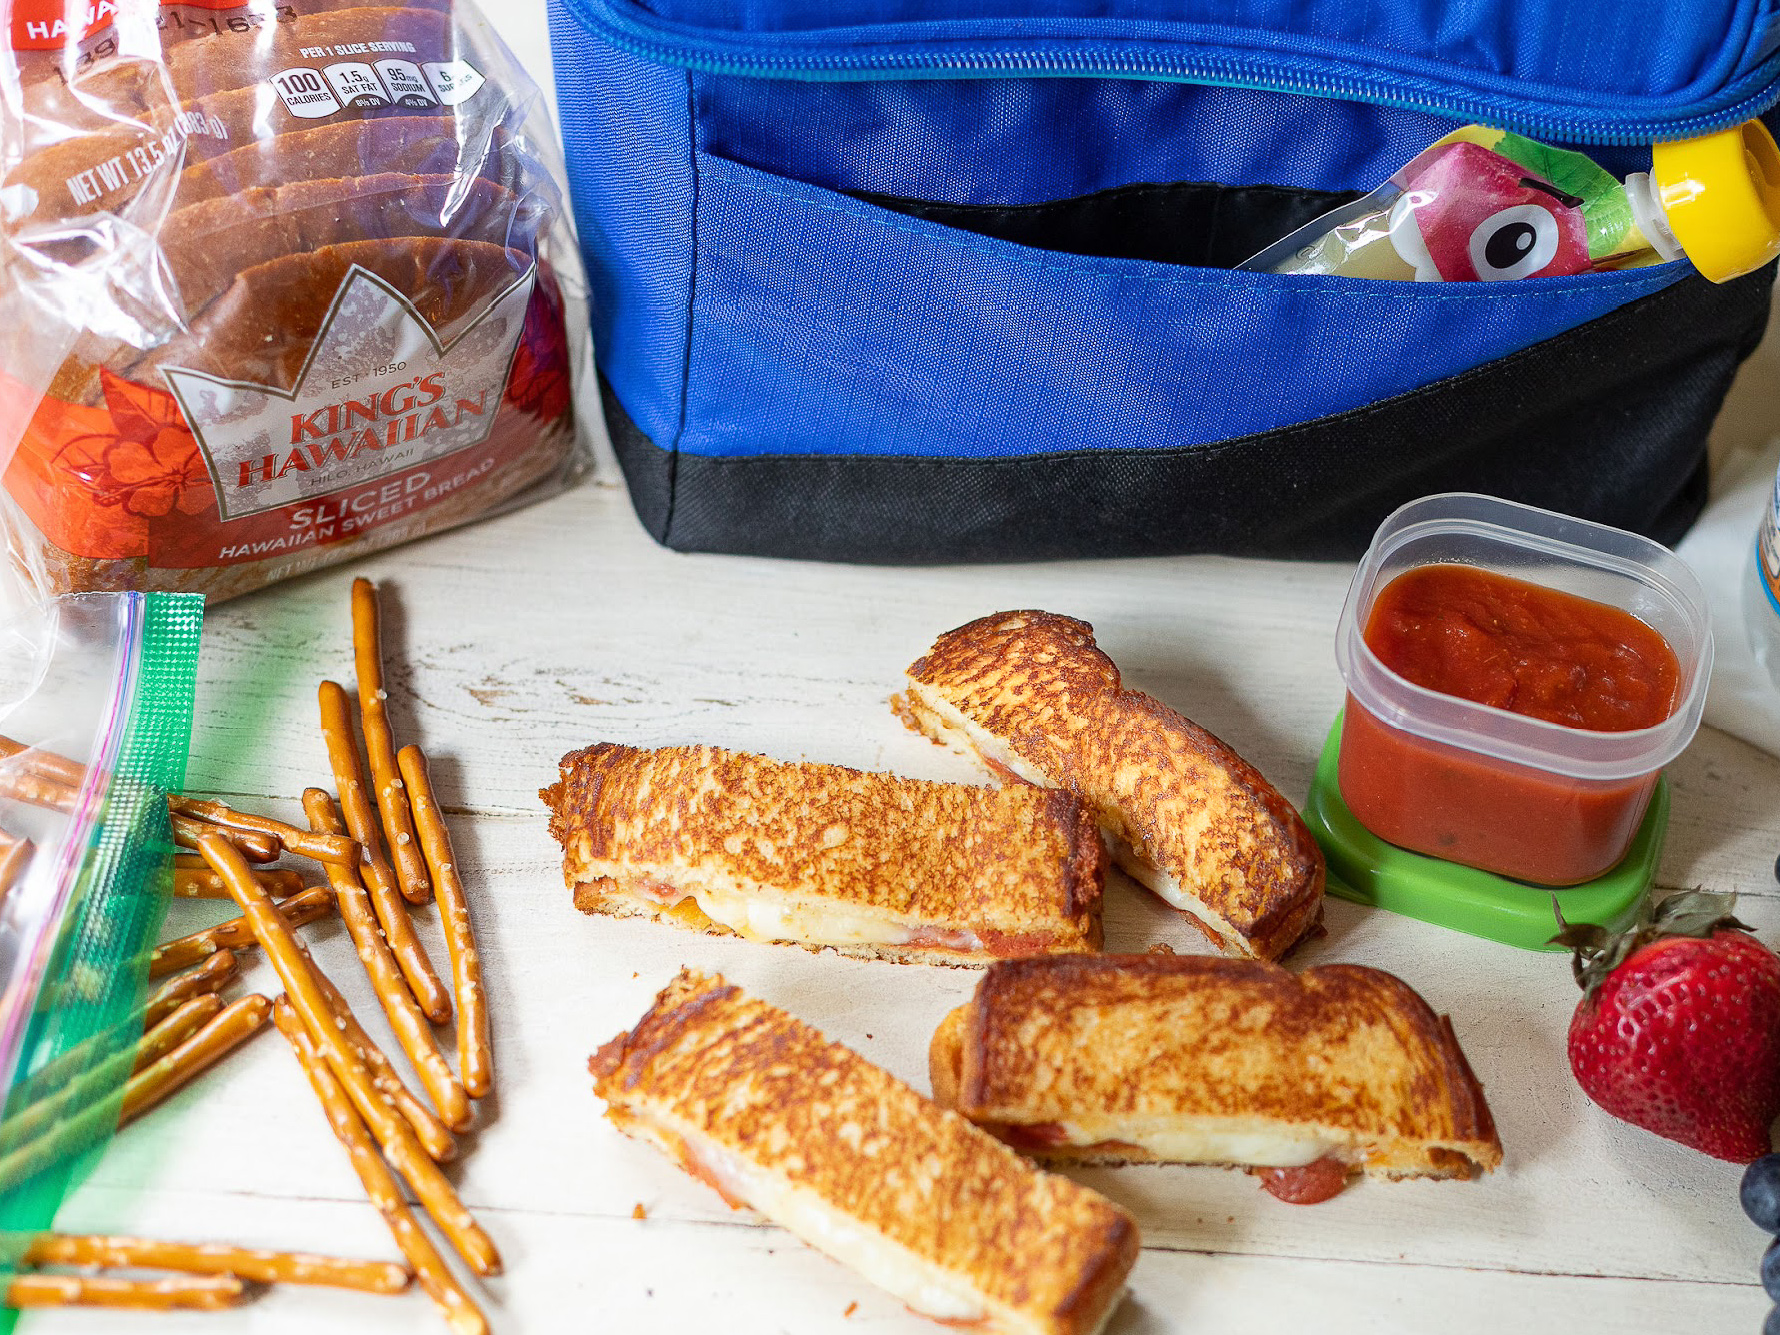 Shake Up The Lunch Box With A Pizza Melt Sandwich + Share A Post And Help Feed Kids on I Heart Publix 2